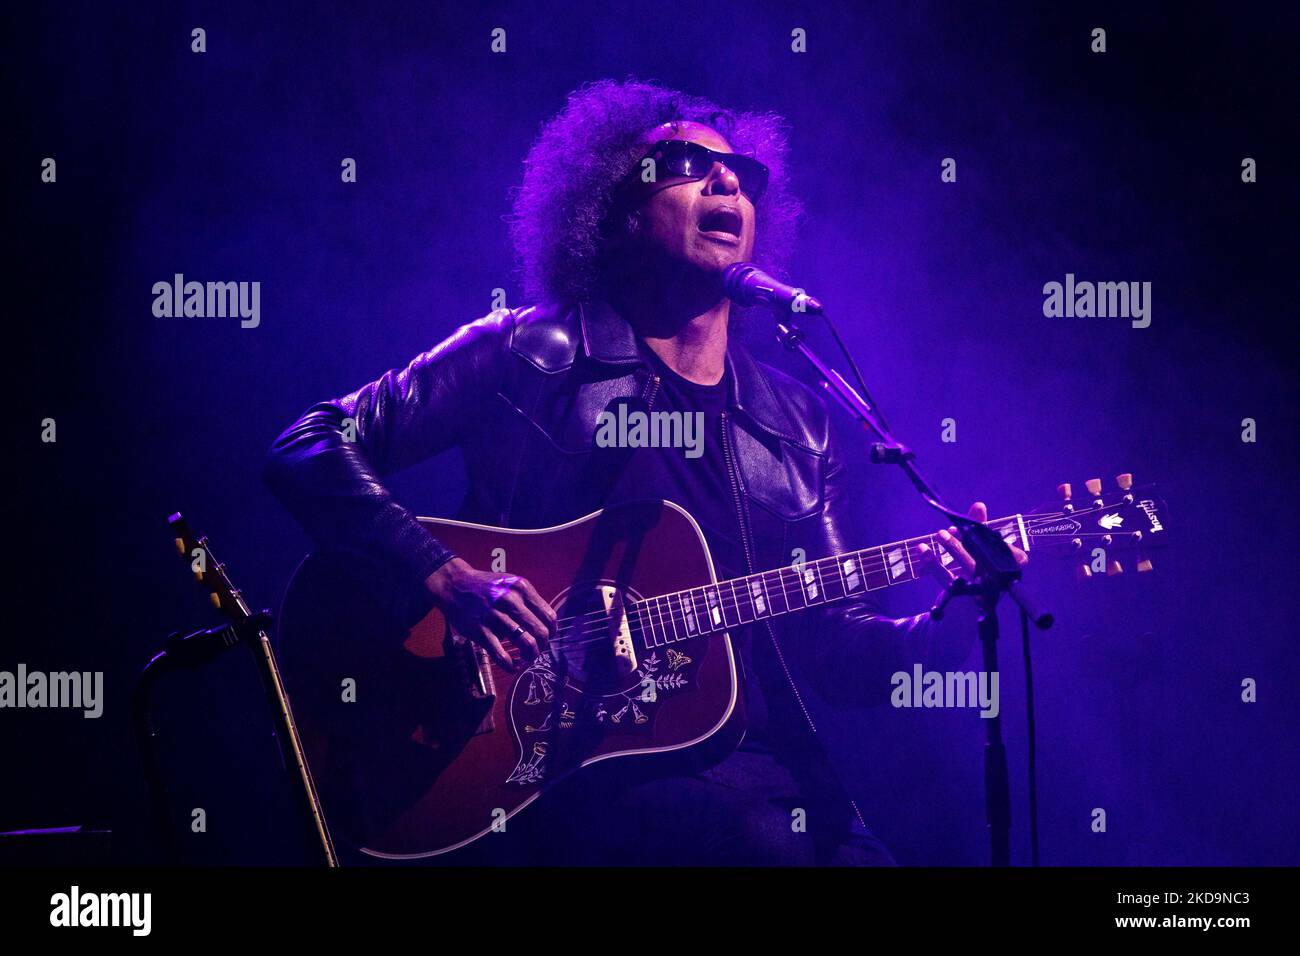 American musician - best known as the current co-lead vocalist and rhythm guitarist for the rock band Alice in Chains - William DuVall in concert at Santeria, Milano, Italy, on May 10 2022. He joined Alice in Chains in 2006, replacing the band's original lead singer, Layne Staley, who died in 2002, and shares vocal duties with guitarist/vocalist Jerry Cantrell. DuVall has recorded three albums with the band: 2009's Black Gives Way to Blue, 2013's The Devil Put Dinosaurs Here, and 2018's Rainier Fog.[3] DuVall won an ASCAP Pop Music Award for co-writing the song 'I Know' for Dionne Farris in 19 Stock Photo